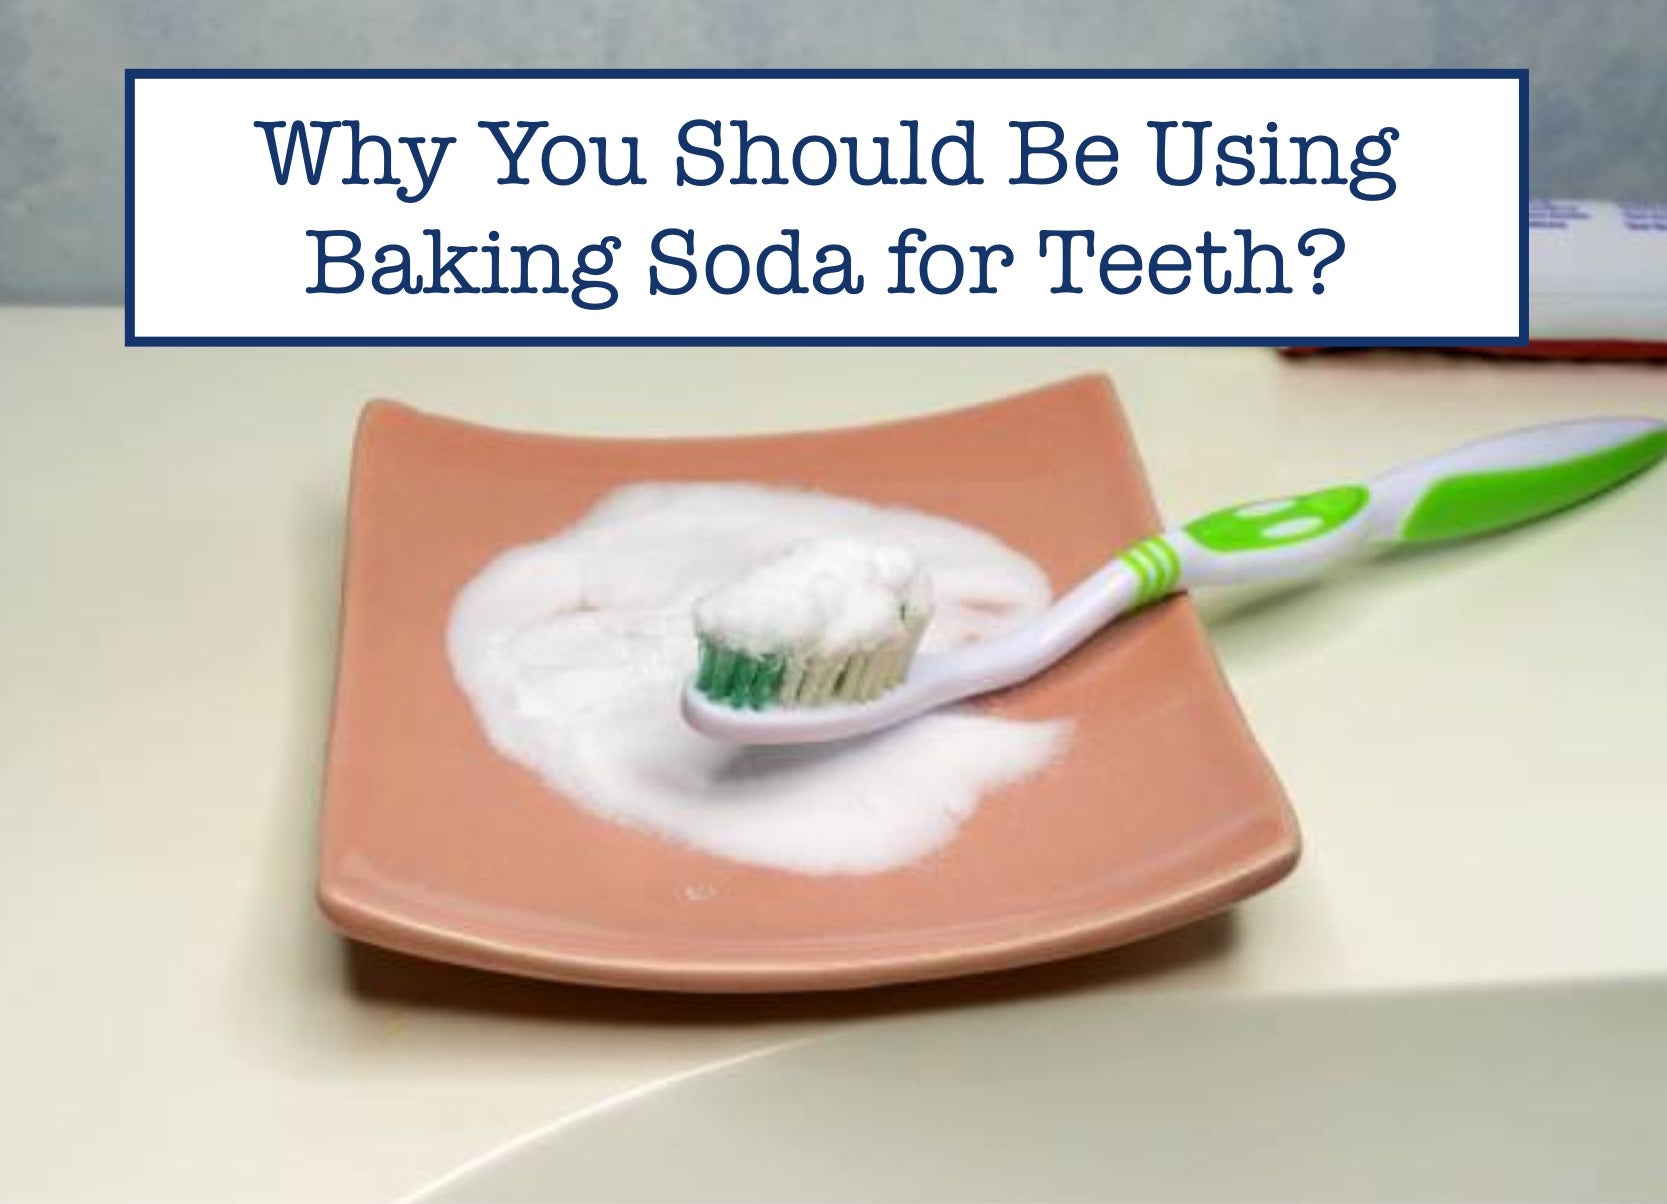 Why You Should Be Using Baking Soda for Teeth